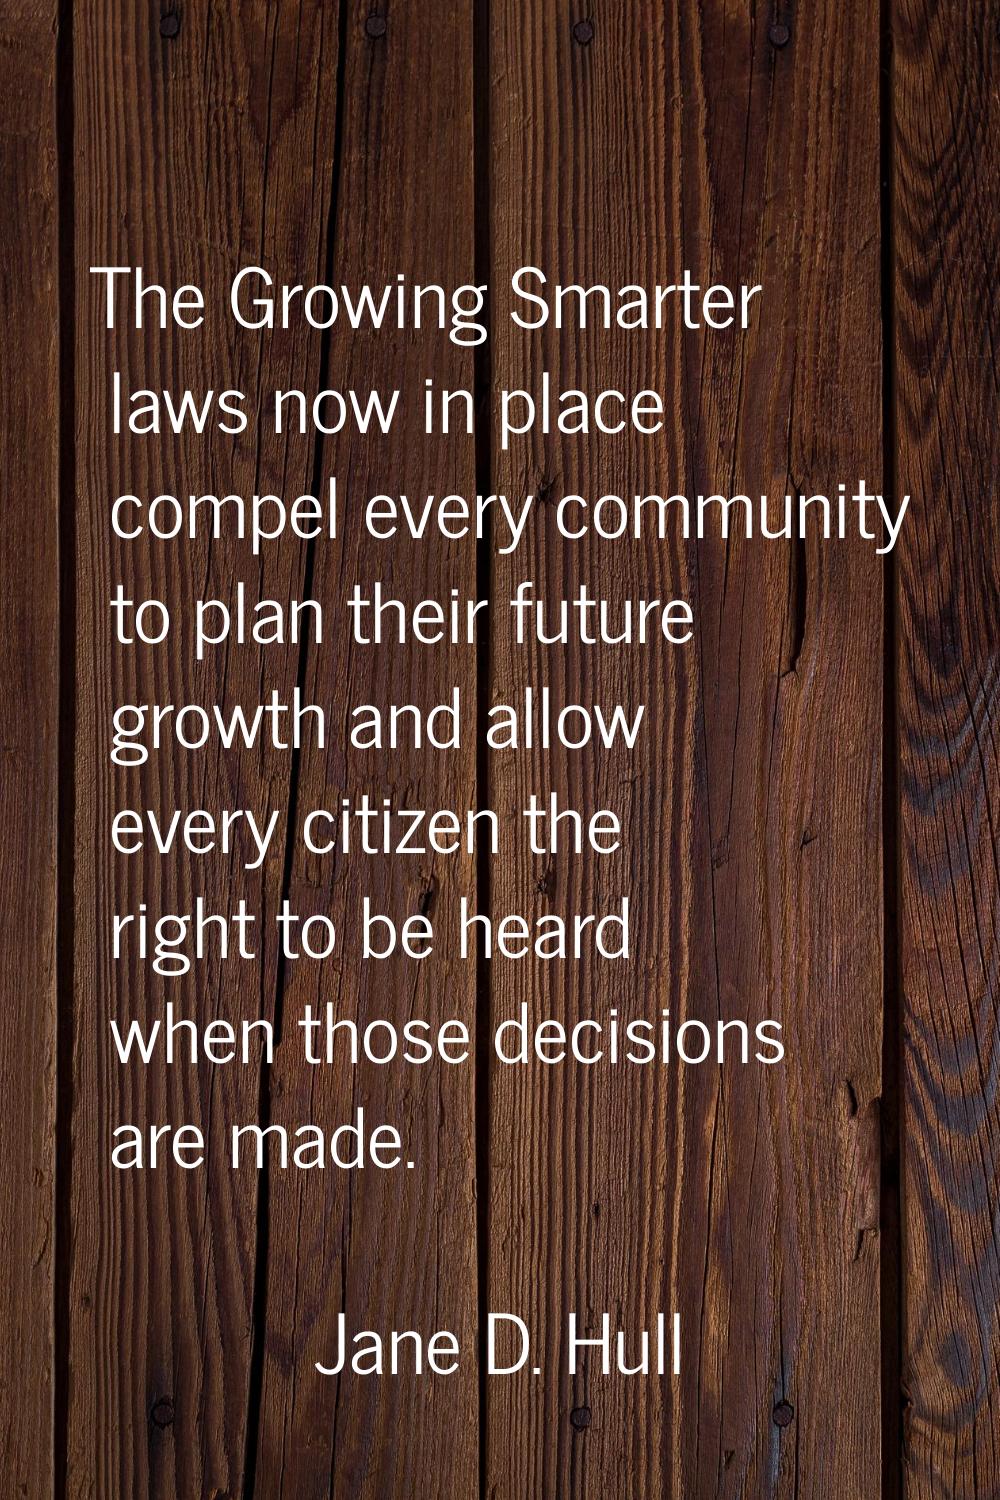 The Growing Smarter laws now in place compel every community to plan their future growth and allow 